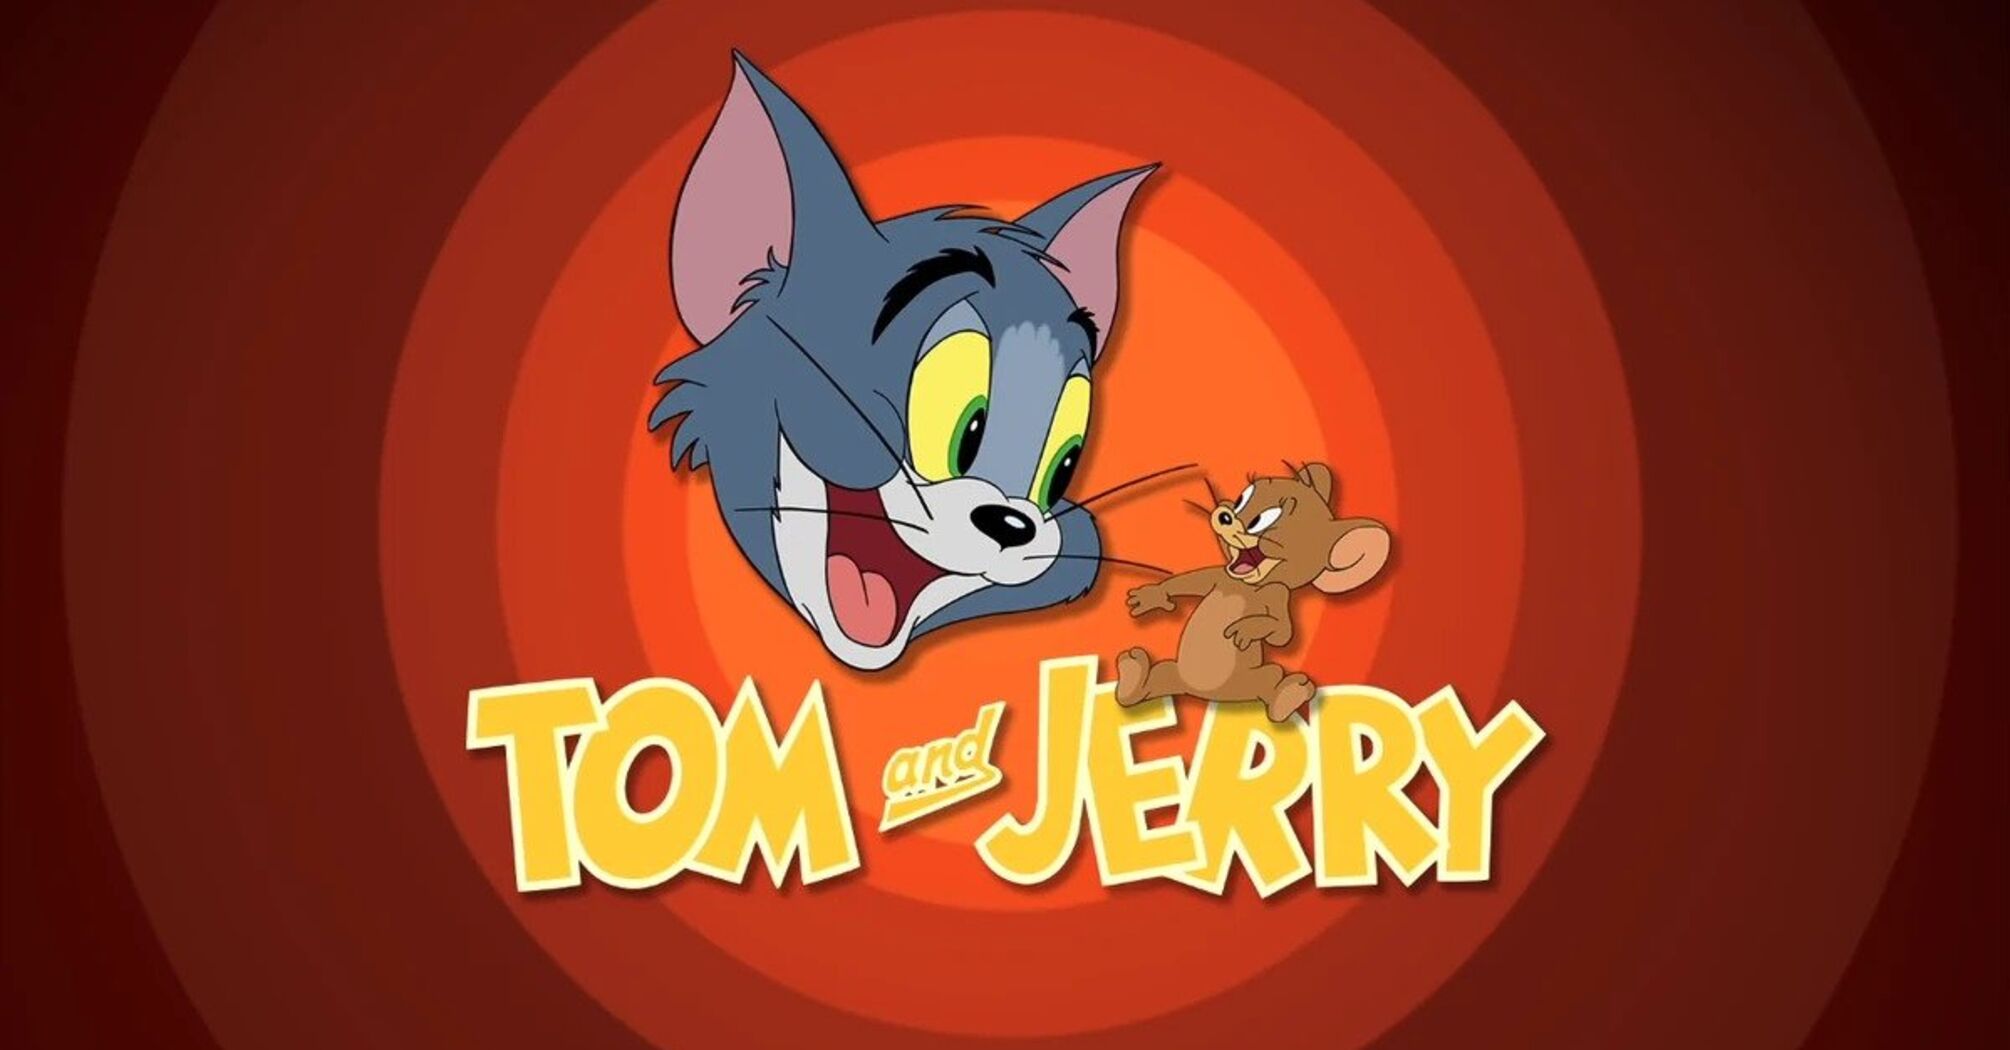 Social media is discussing "Tom and Jerry"